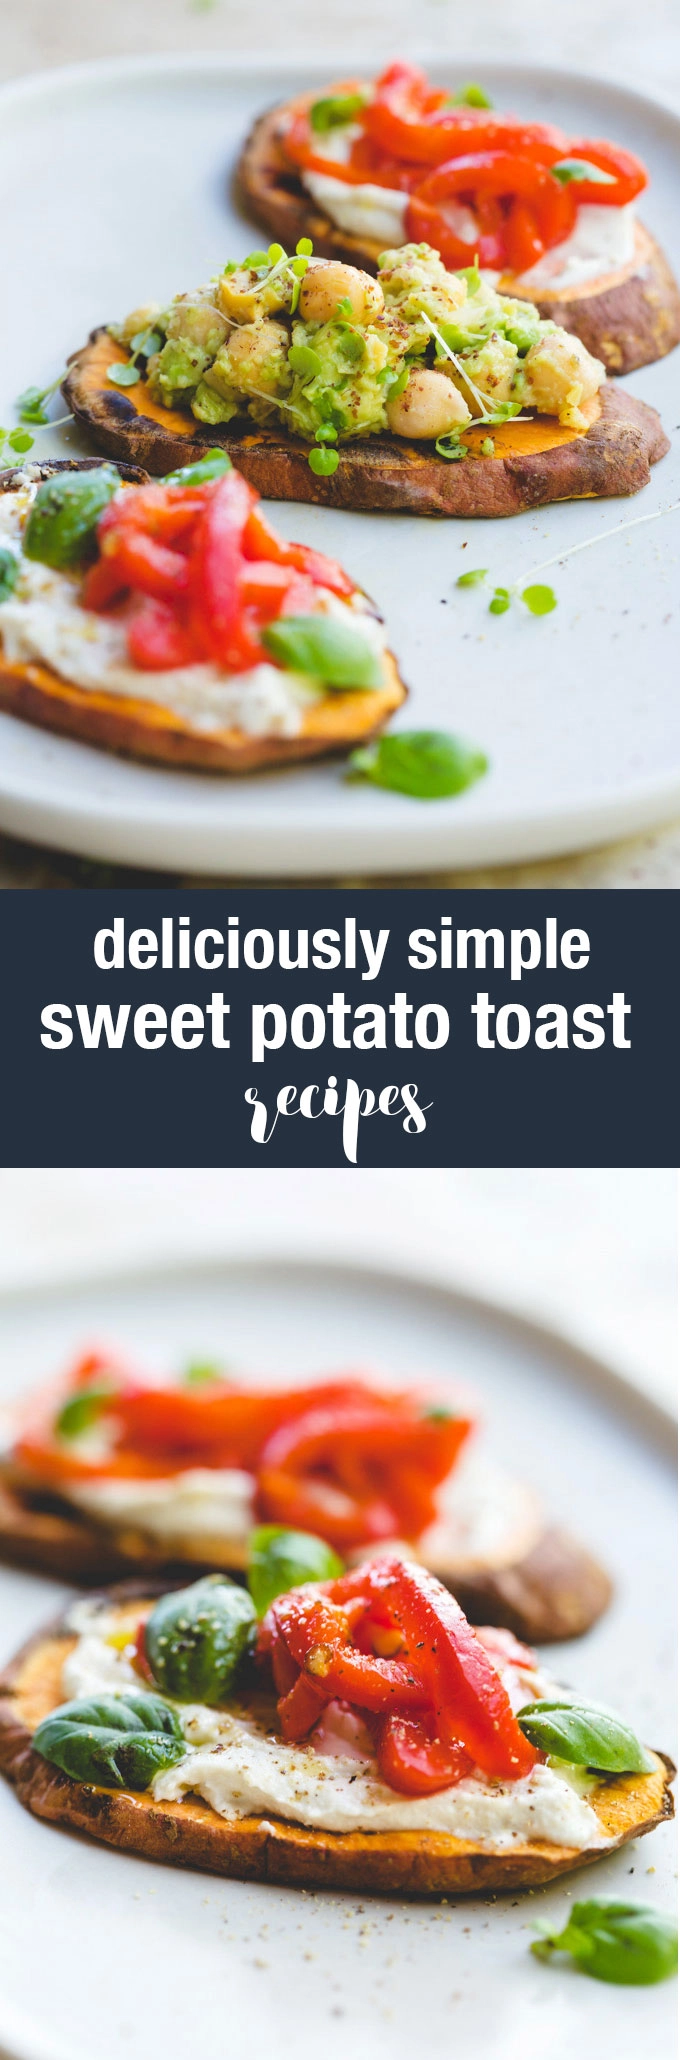 Two images of savoury sweet potato toast with text